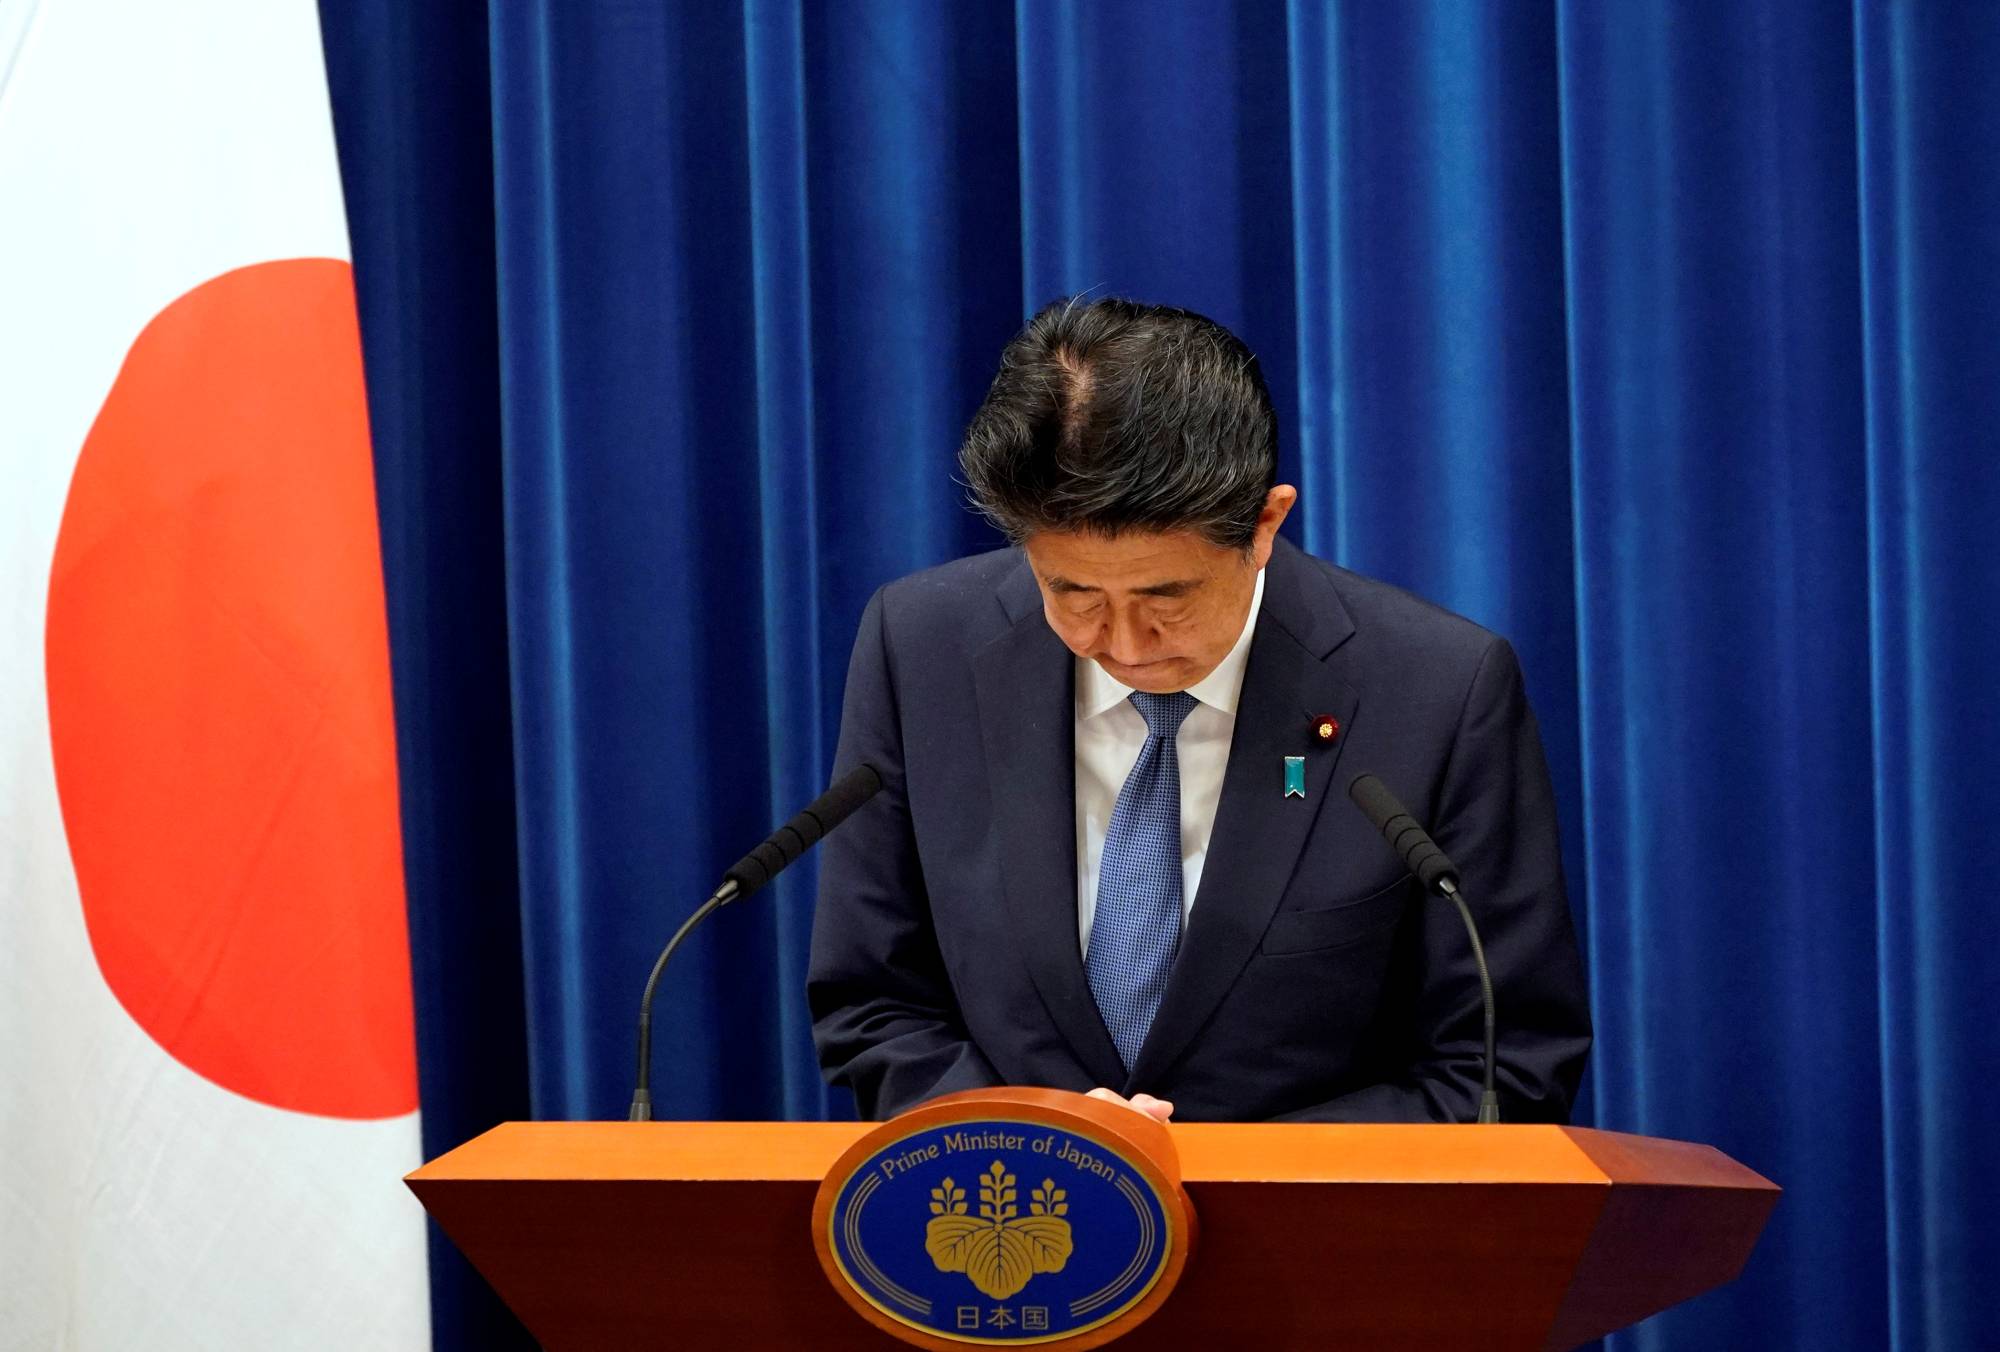 Prime Minister Shinzo Abe bows during a news conference at the Prime Minister's Office in Tokyo on Friday, during which he announced his intention to step down. | POOL / VIA REUTERS